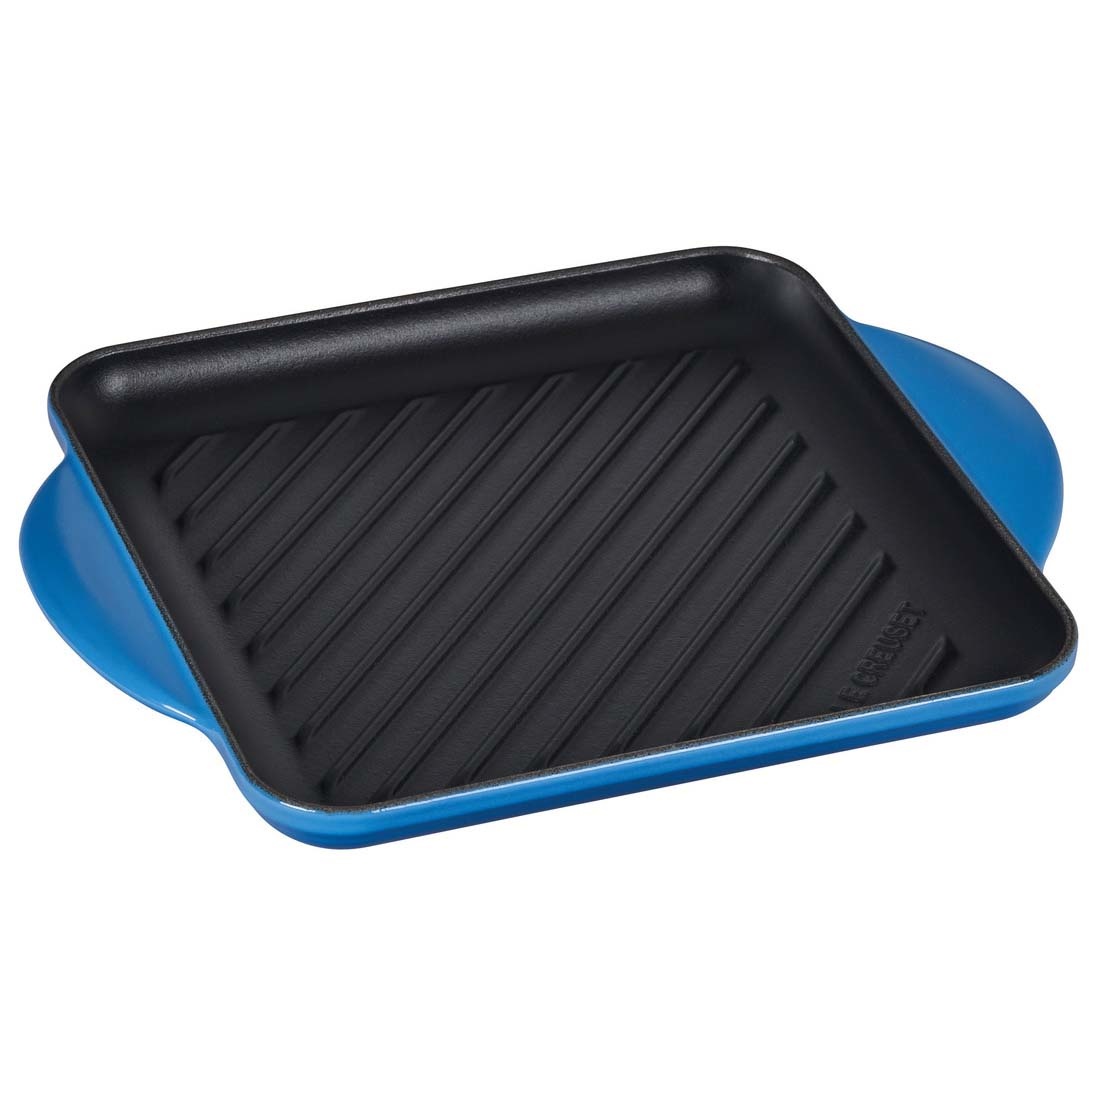 Le Creuset 9.5 Cast Iron Square Grill Pan - Deep Teal